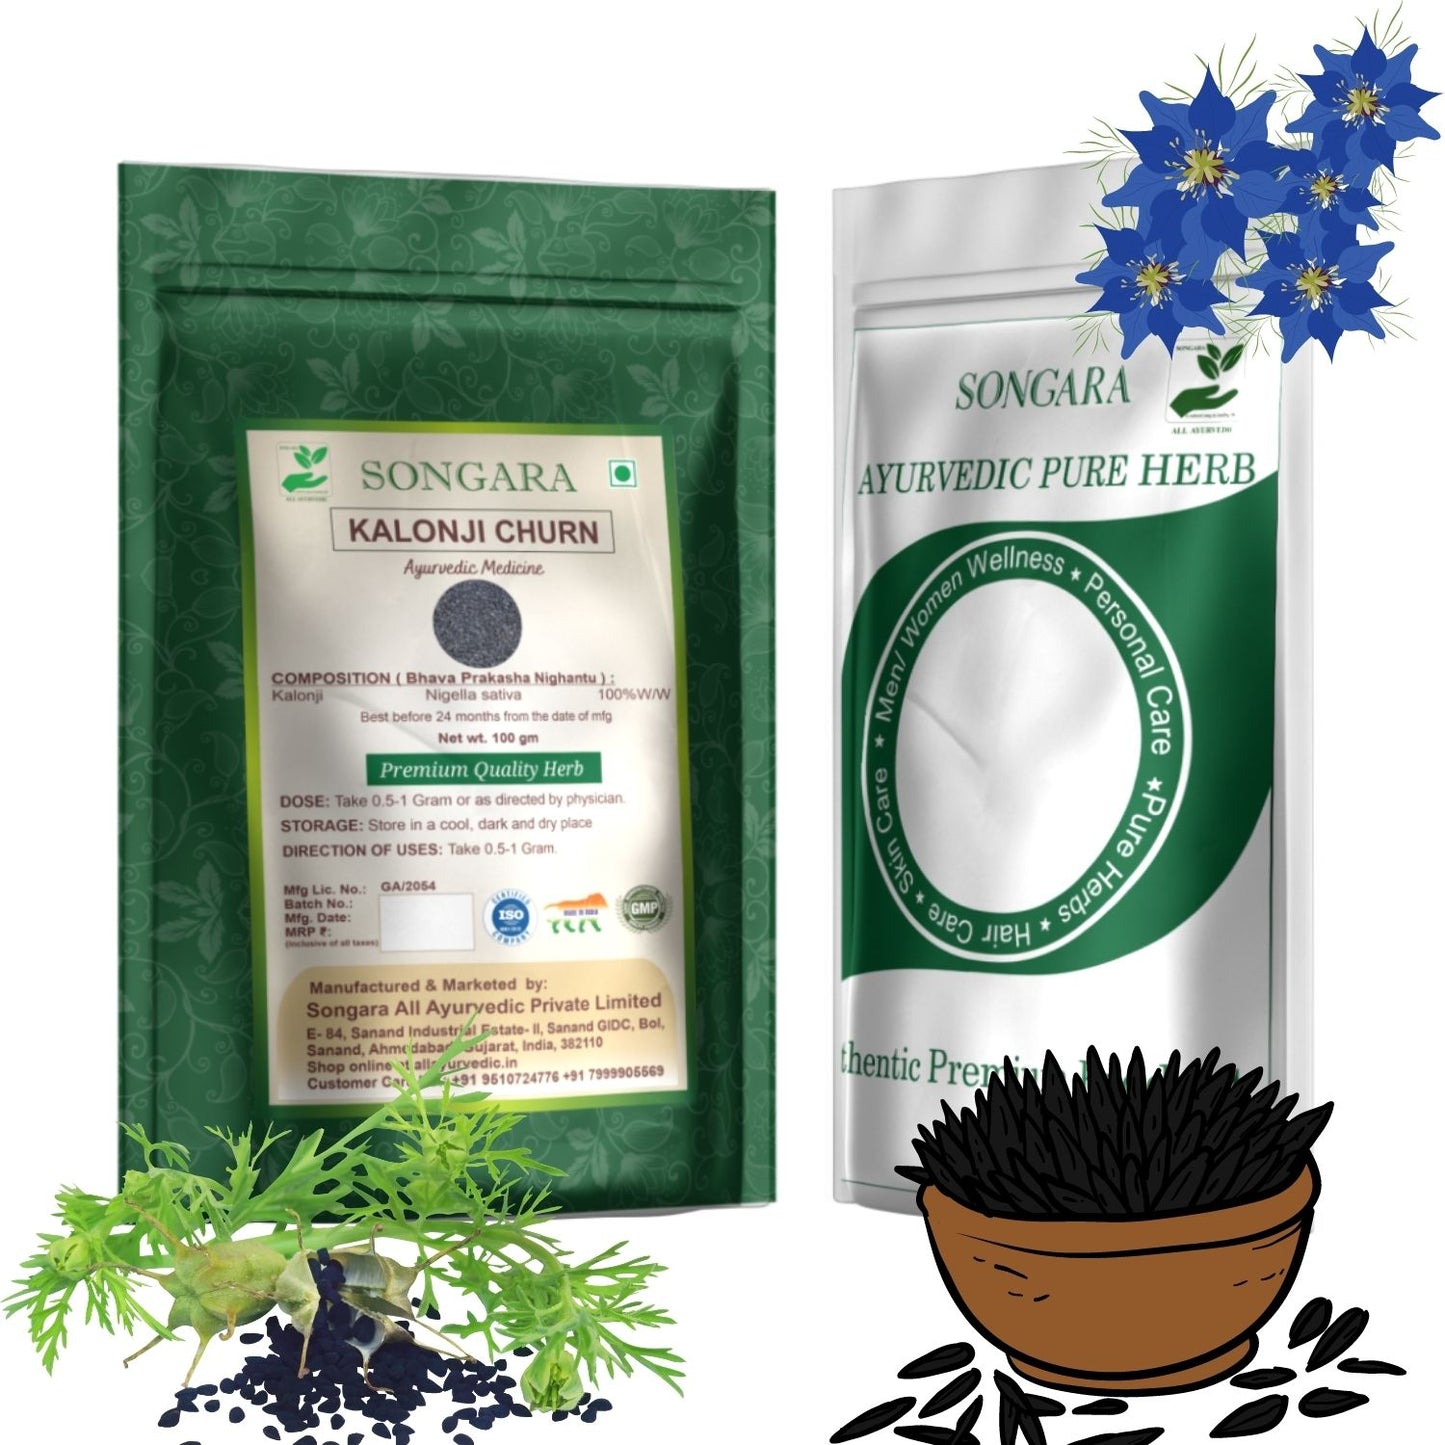 Songara Kalonji Powder: (Nigella sativa) for Health, Hair Growth, Managing Sugar Level, Skin Health, Organically Processed, Premium Natural, (Indian Superfood, Add flavour to curries, Indian Breads and Baked Goods, (100G, Pouch)